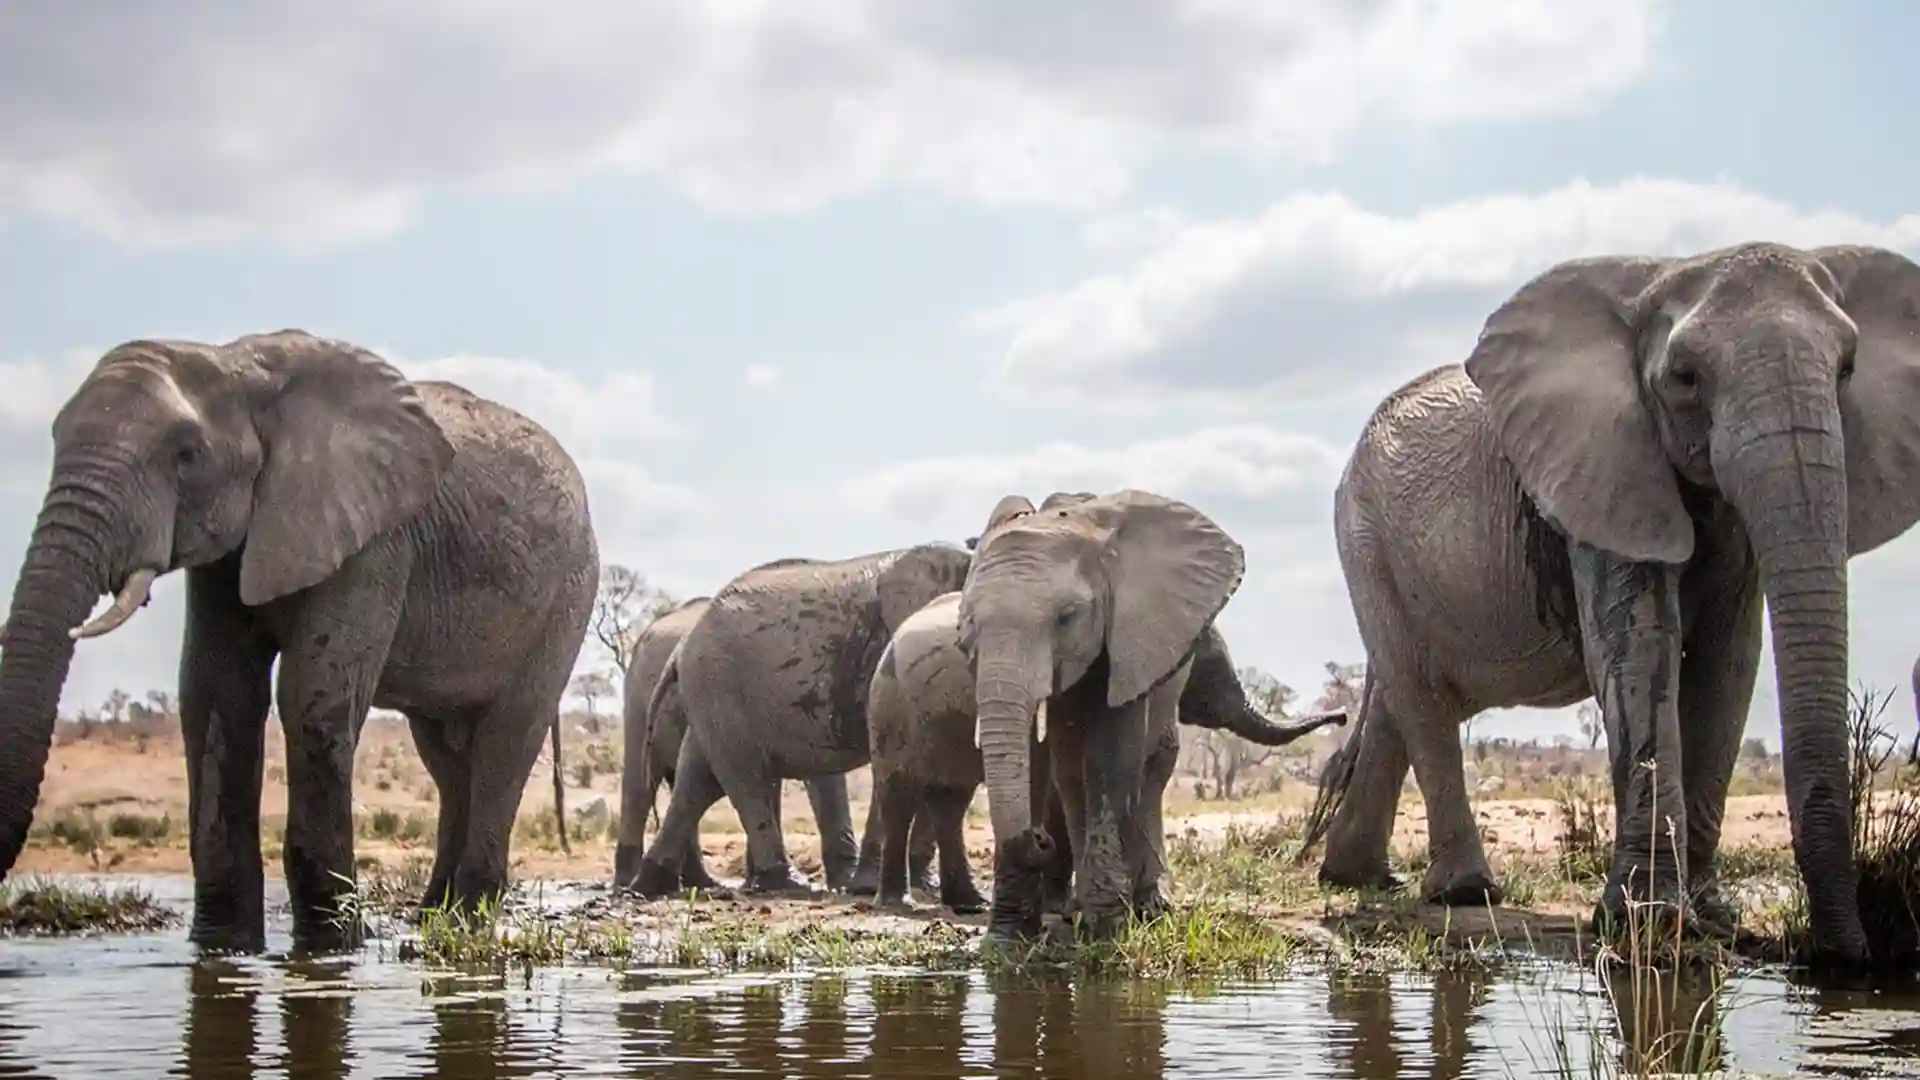 Elephants drinking water in Kruger National Park in South Africa.